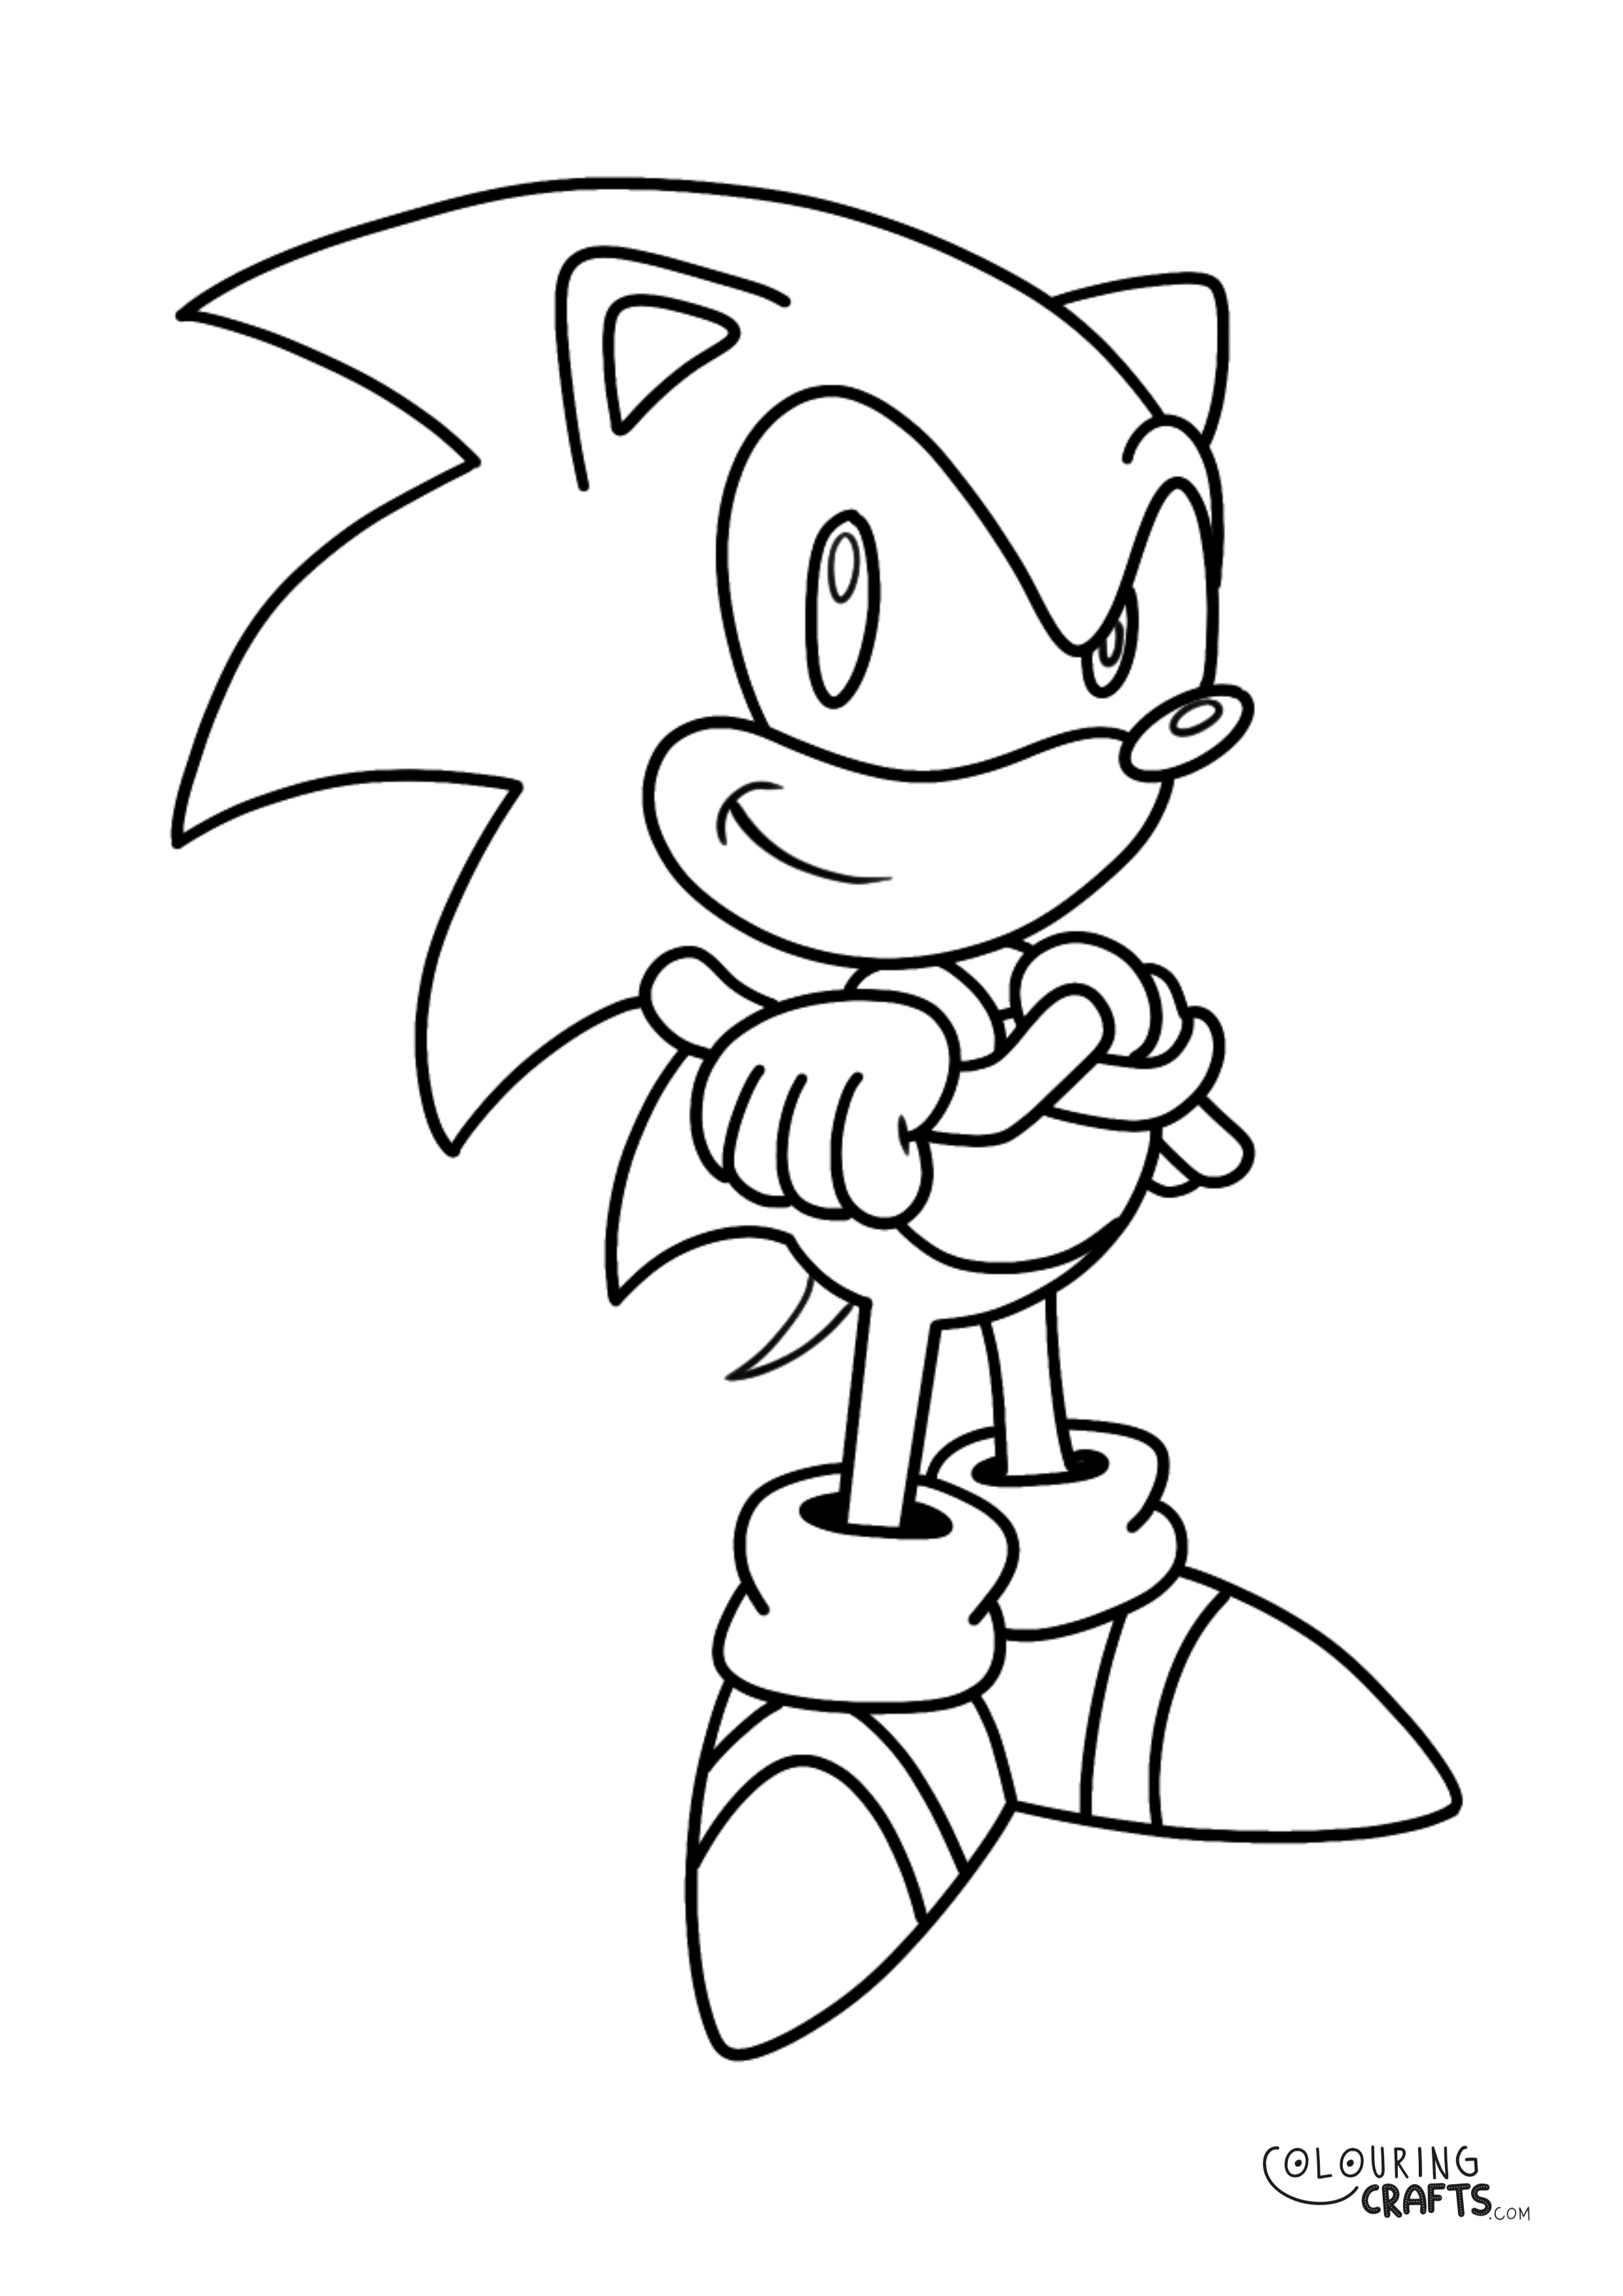 Sonic The Hedgehog Colouring Page - Colouring Crafts